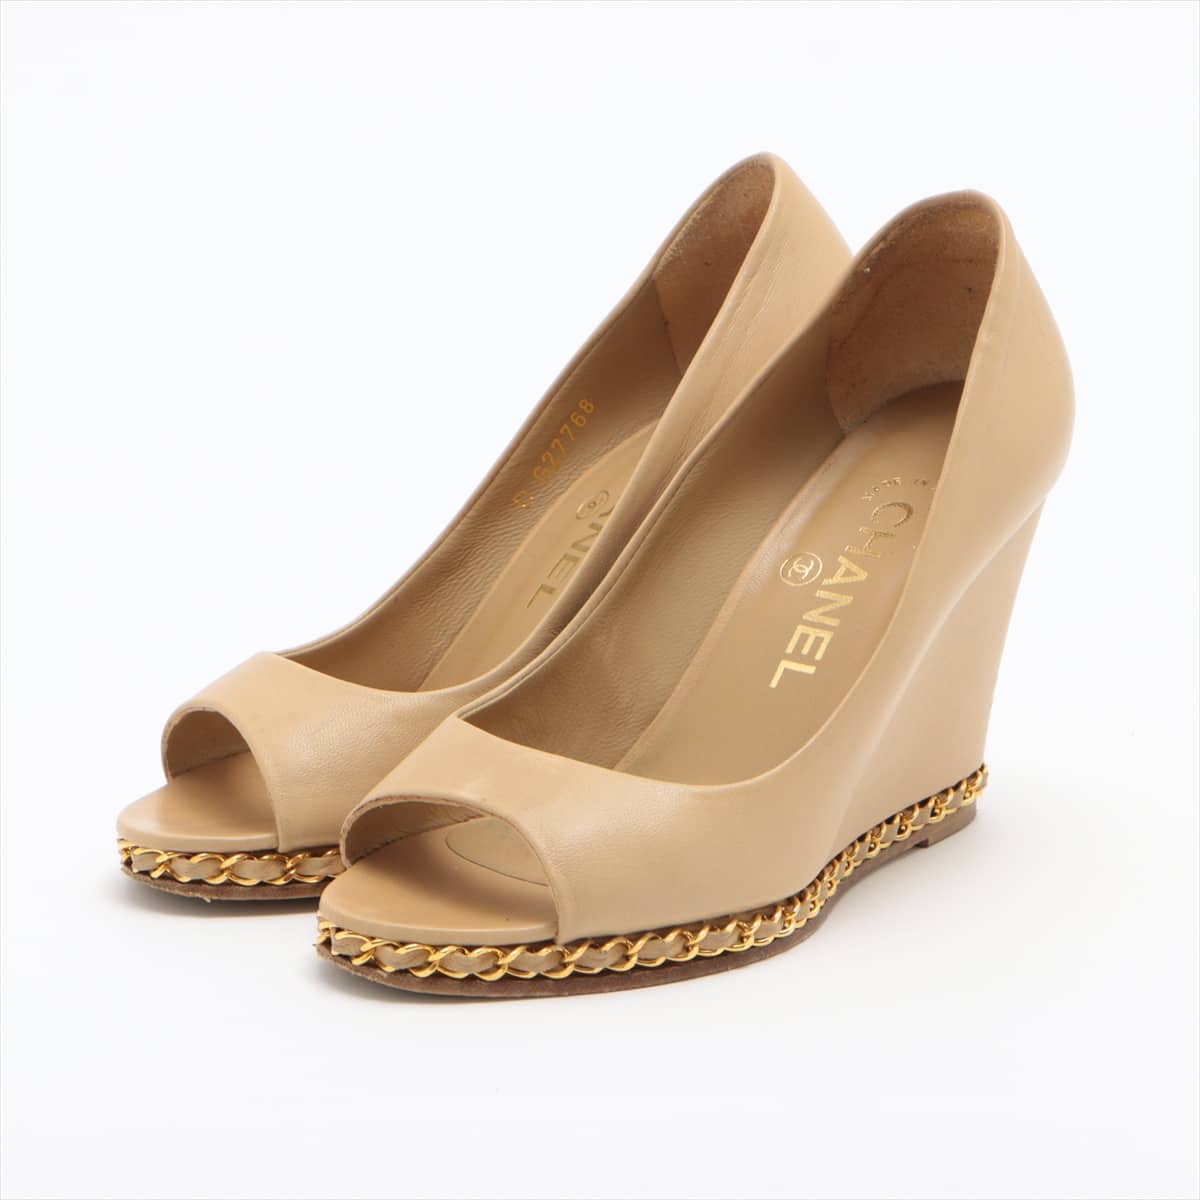 Chanel Coco Mark Leather Open-toe Pumps 36 1/2C Ladies' Beige x gold G27768 Chain